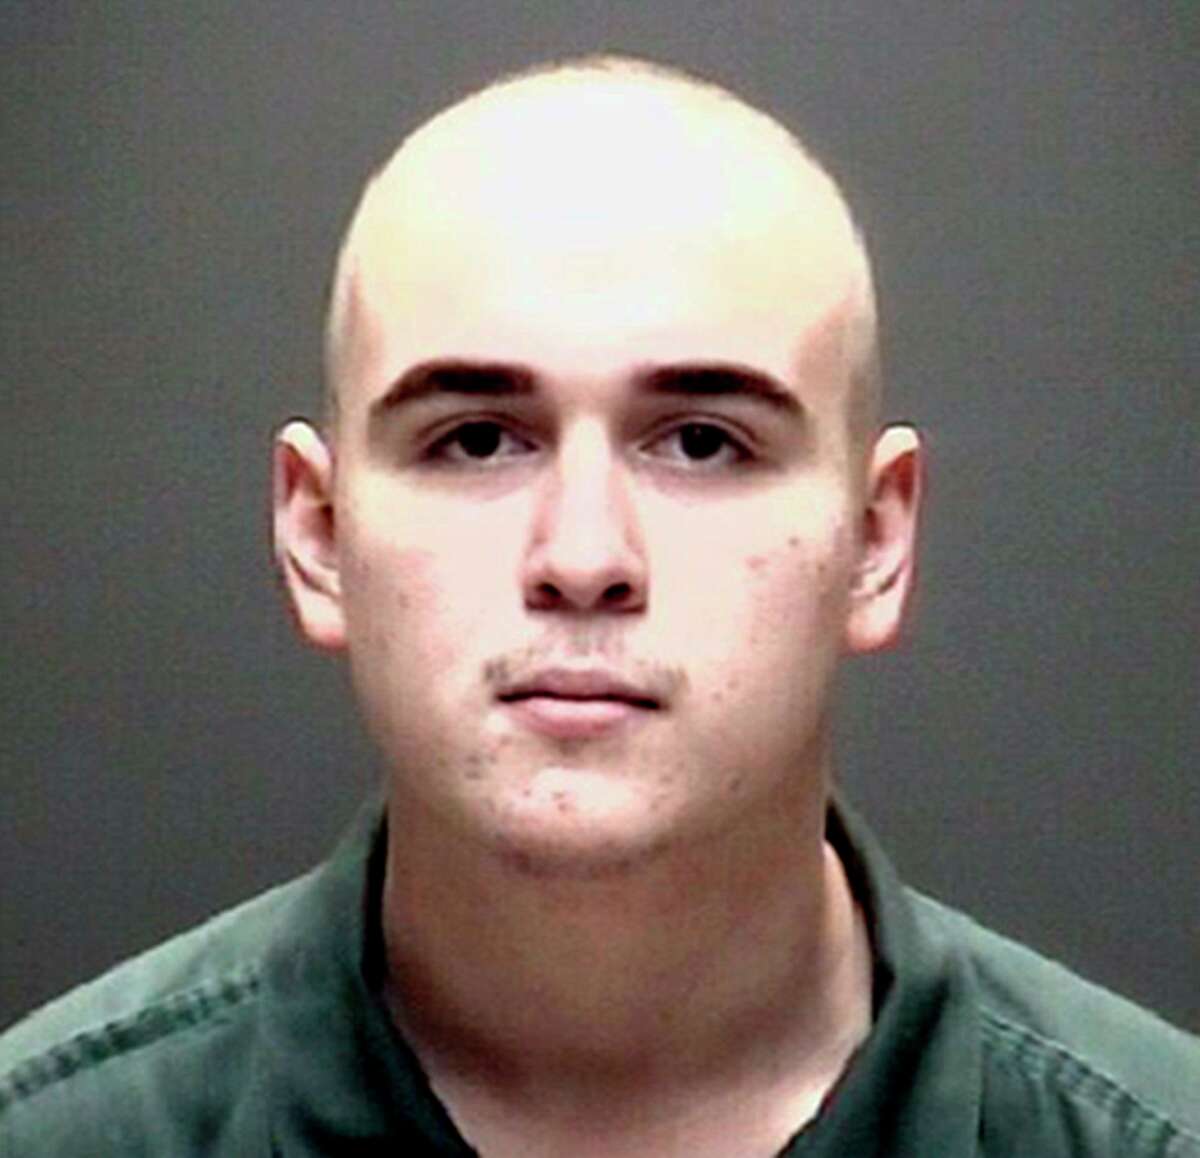 FILE - This file photo provided by the Galveston County Jail in Galveston, Texas, shows Dimitrios Pagourtzis, the suspect in the 2018 massacre of eight students and two teachers at Santa Fe High School. A judge on March 11, 2020 signed an order stating that Pagourtzis will continue to be evaluated at a mental health facility for up to a year to see if he regains competency to stand trial.